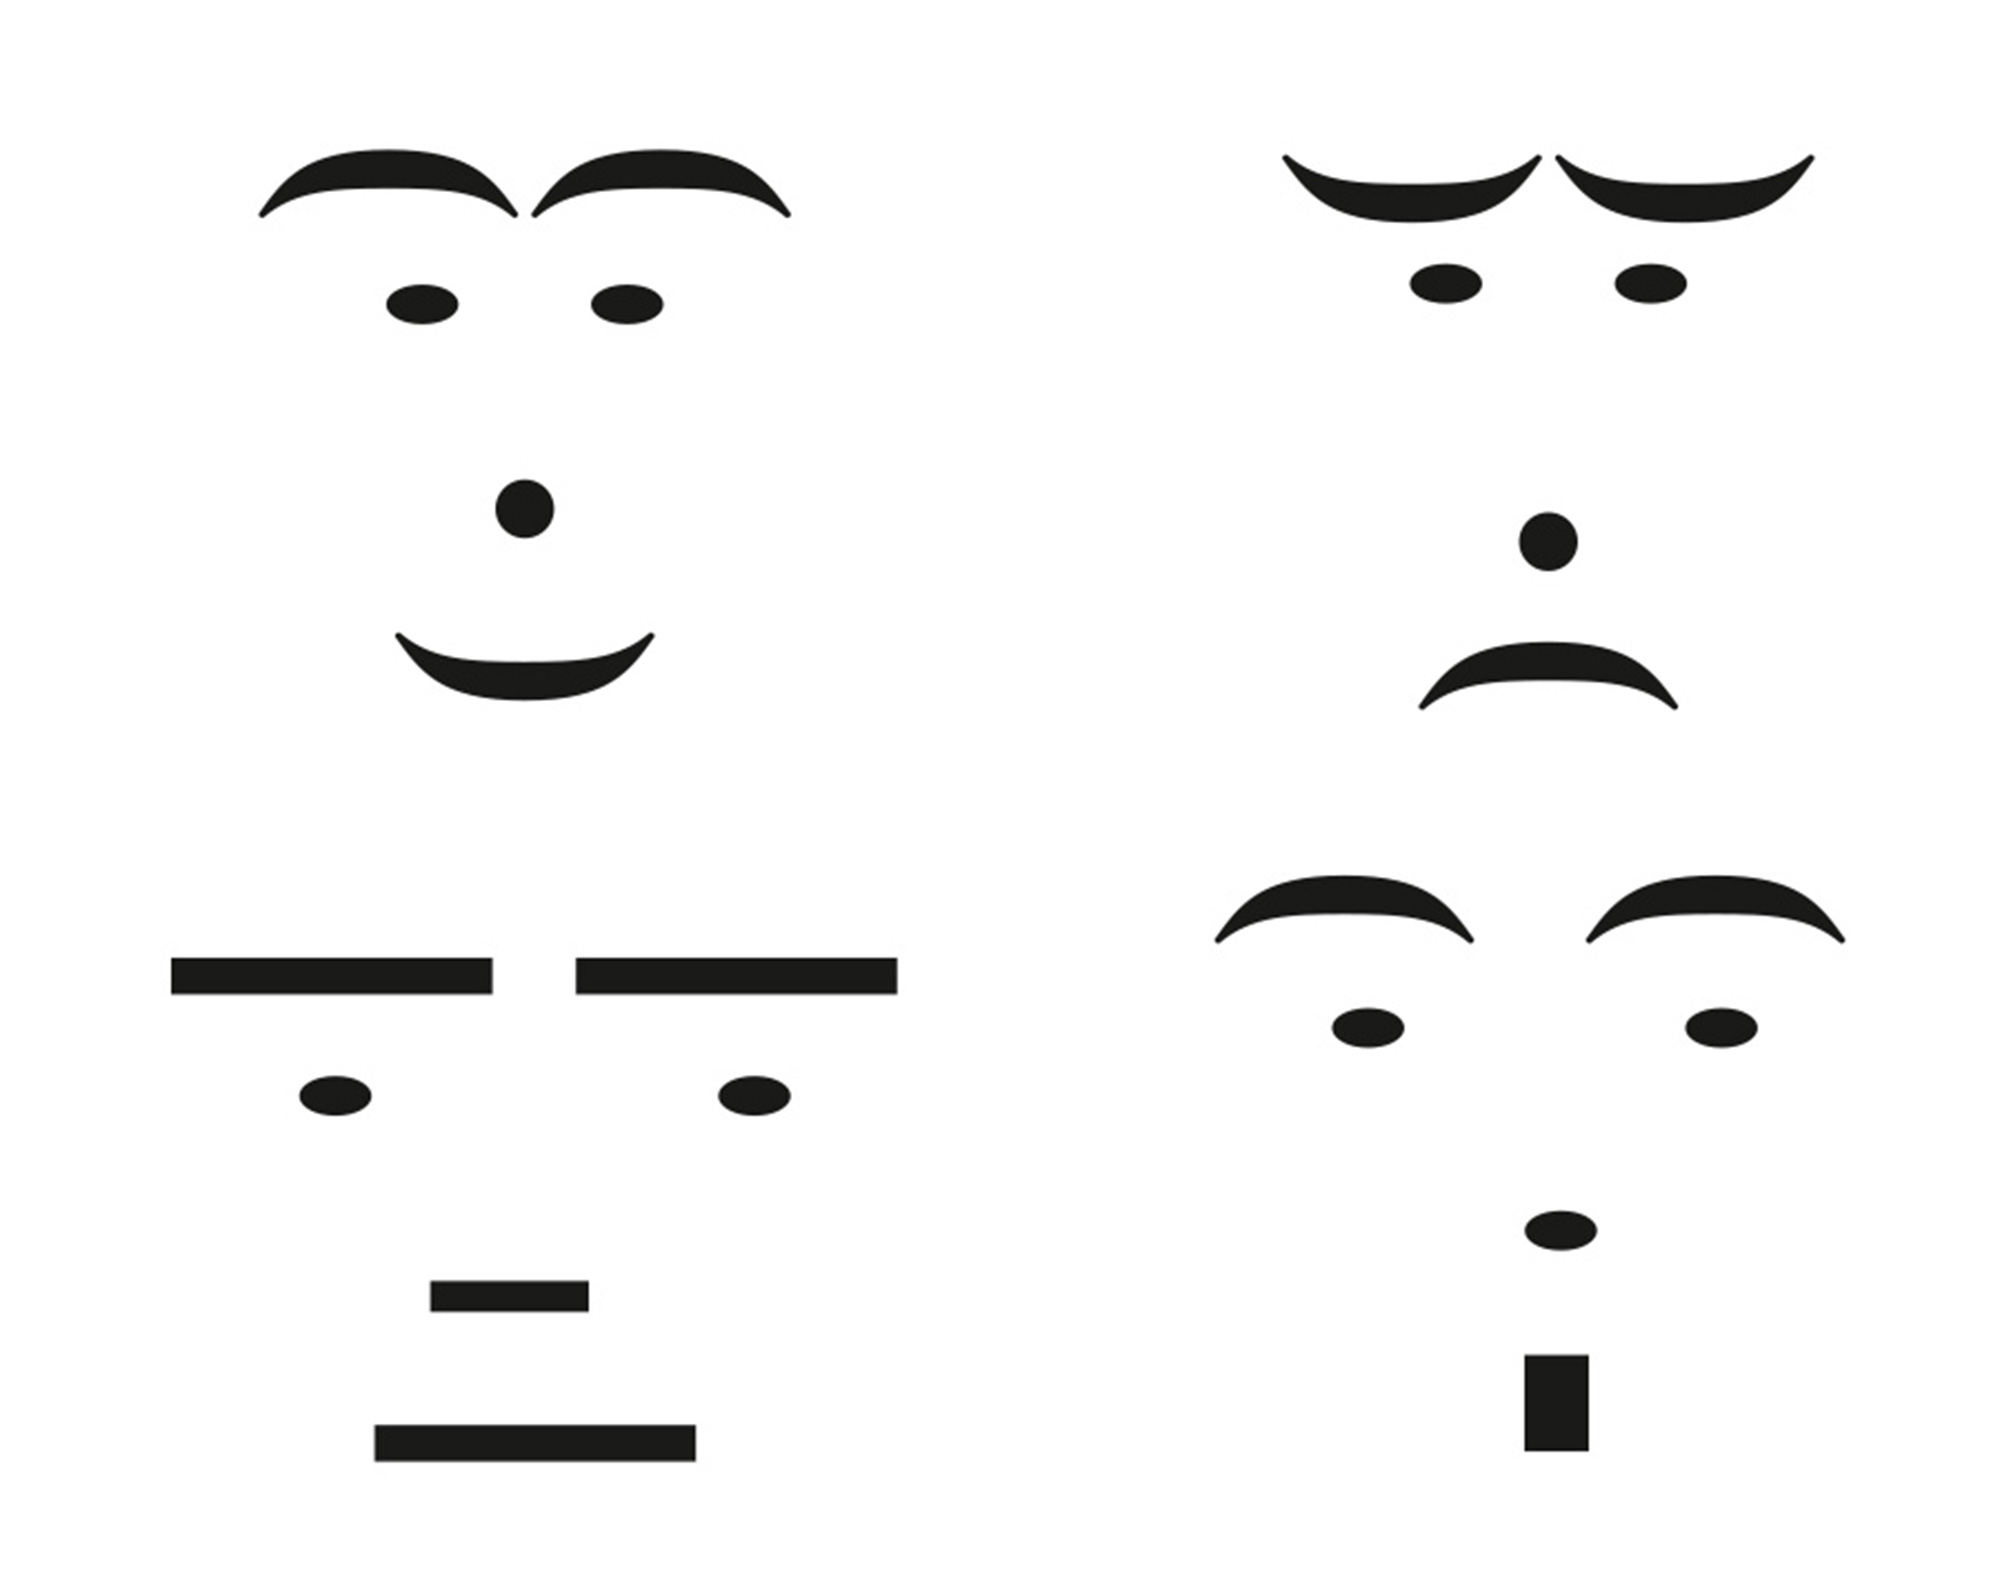 An eighteen eighty-one illustration of early emoticons courtesy of Puck magazine. The emoticons depict Joy, Melancholy, Indifference, and Astonishment.